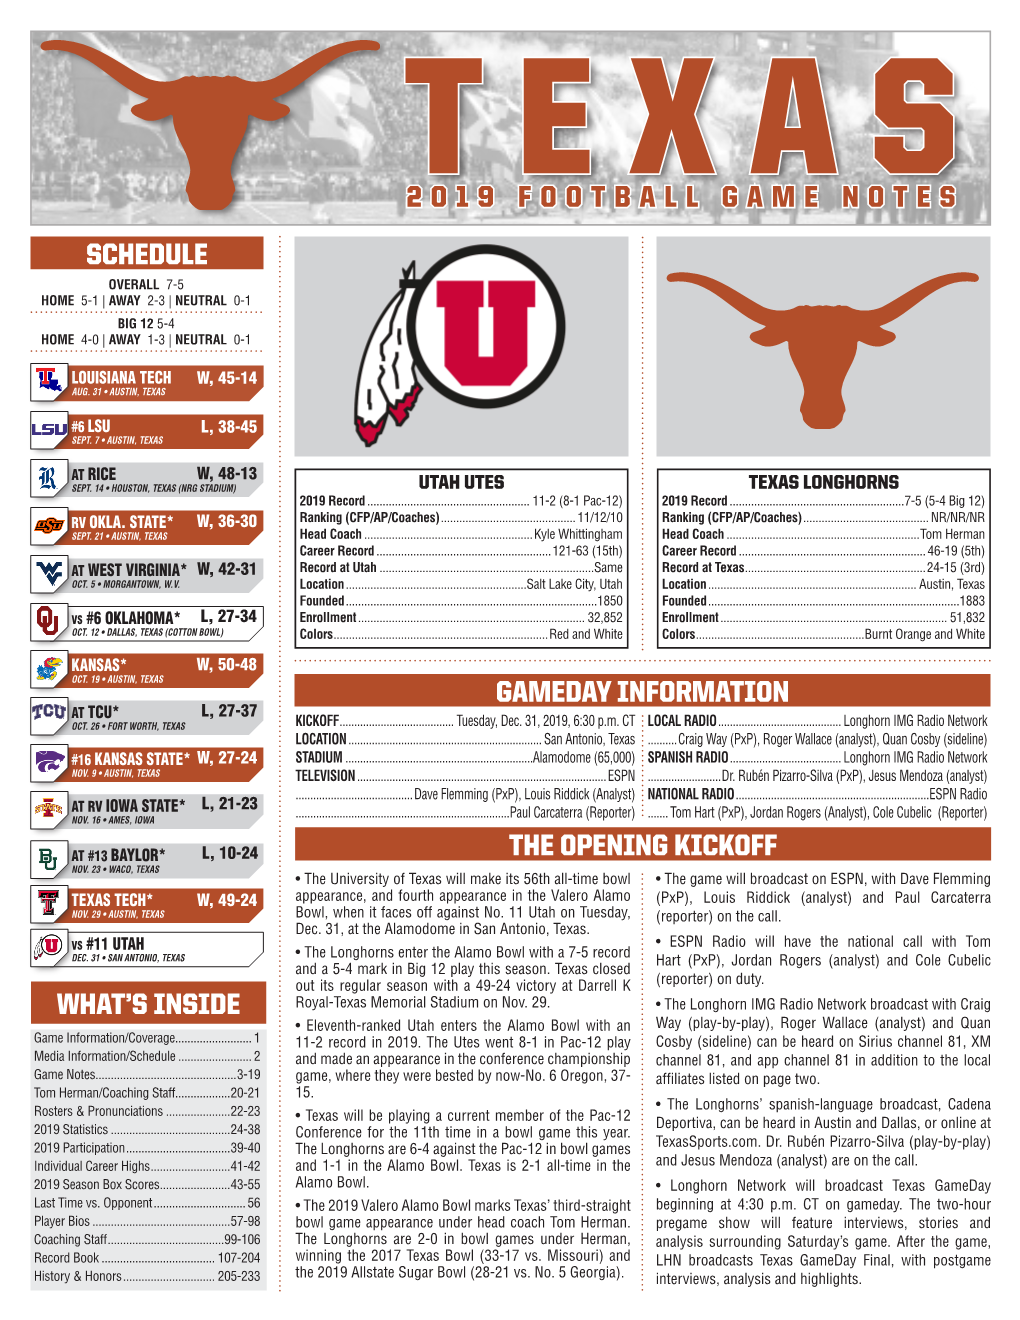 2019 Football Game Notes Gameday Information The